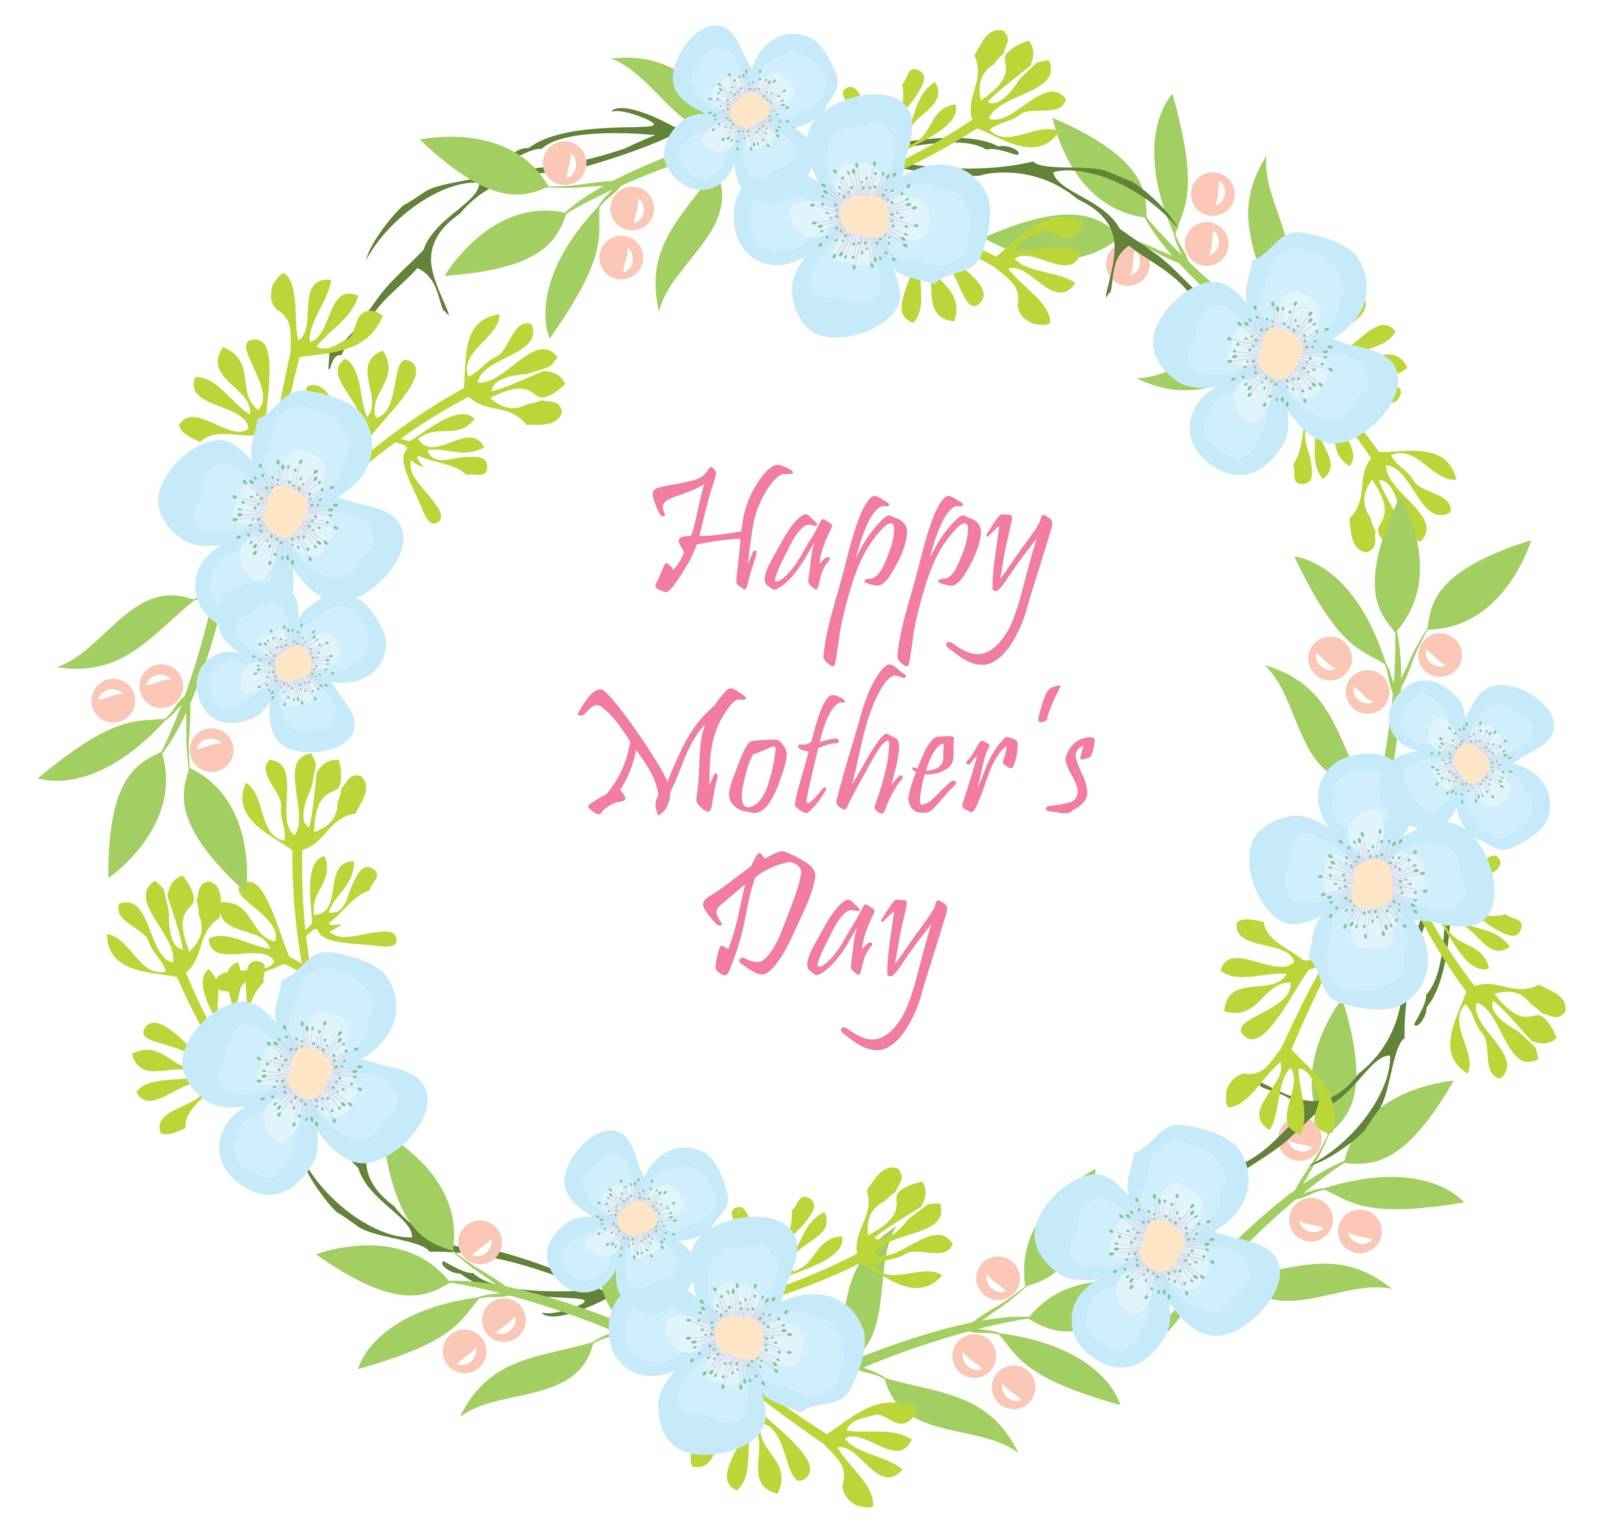 vector illustration of floral wreath for happy mother's day